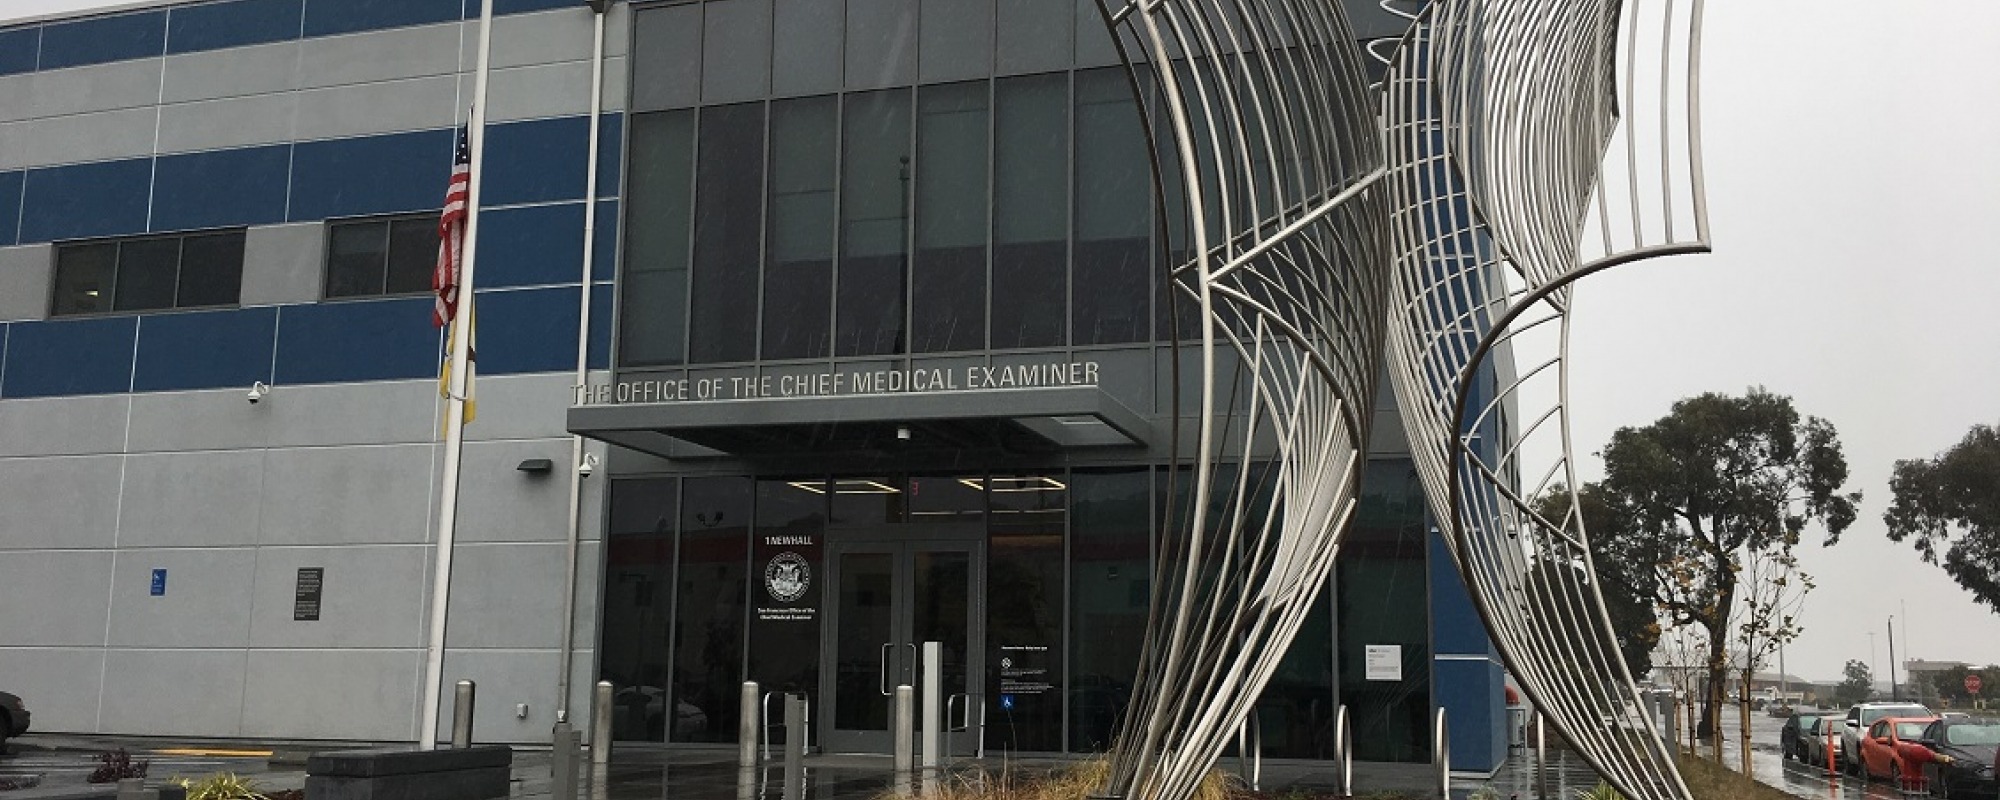 The Office of the Chief Medical Examiner facility